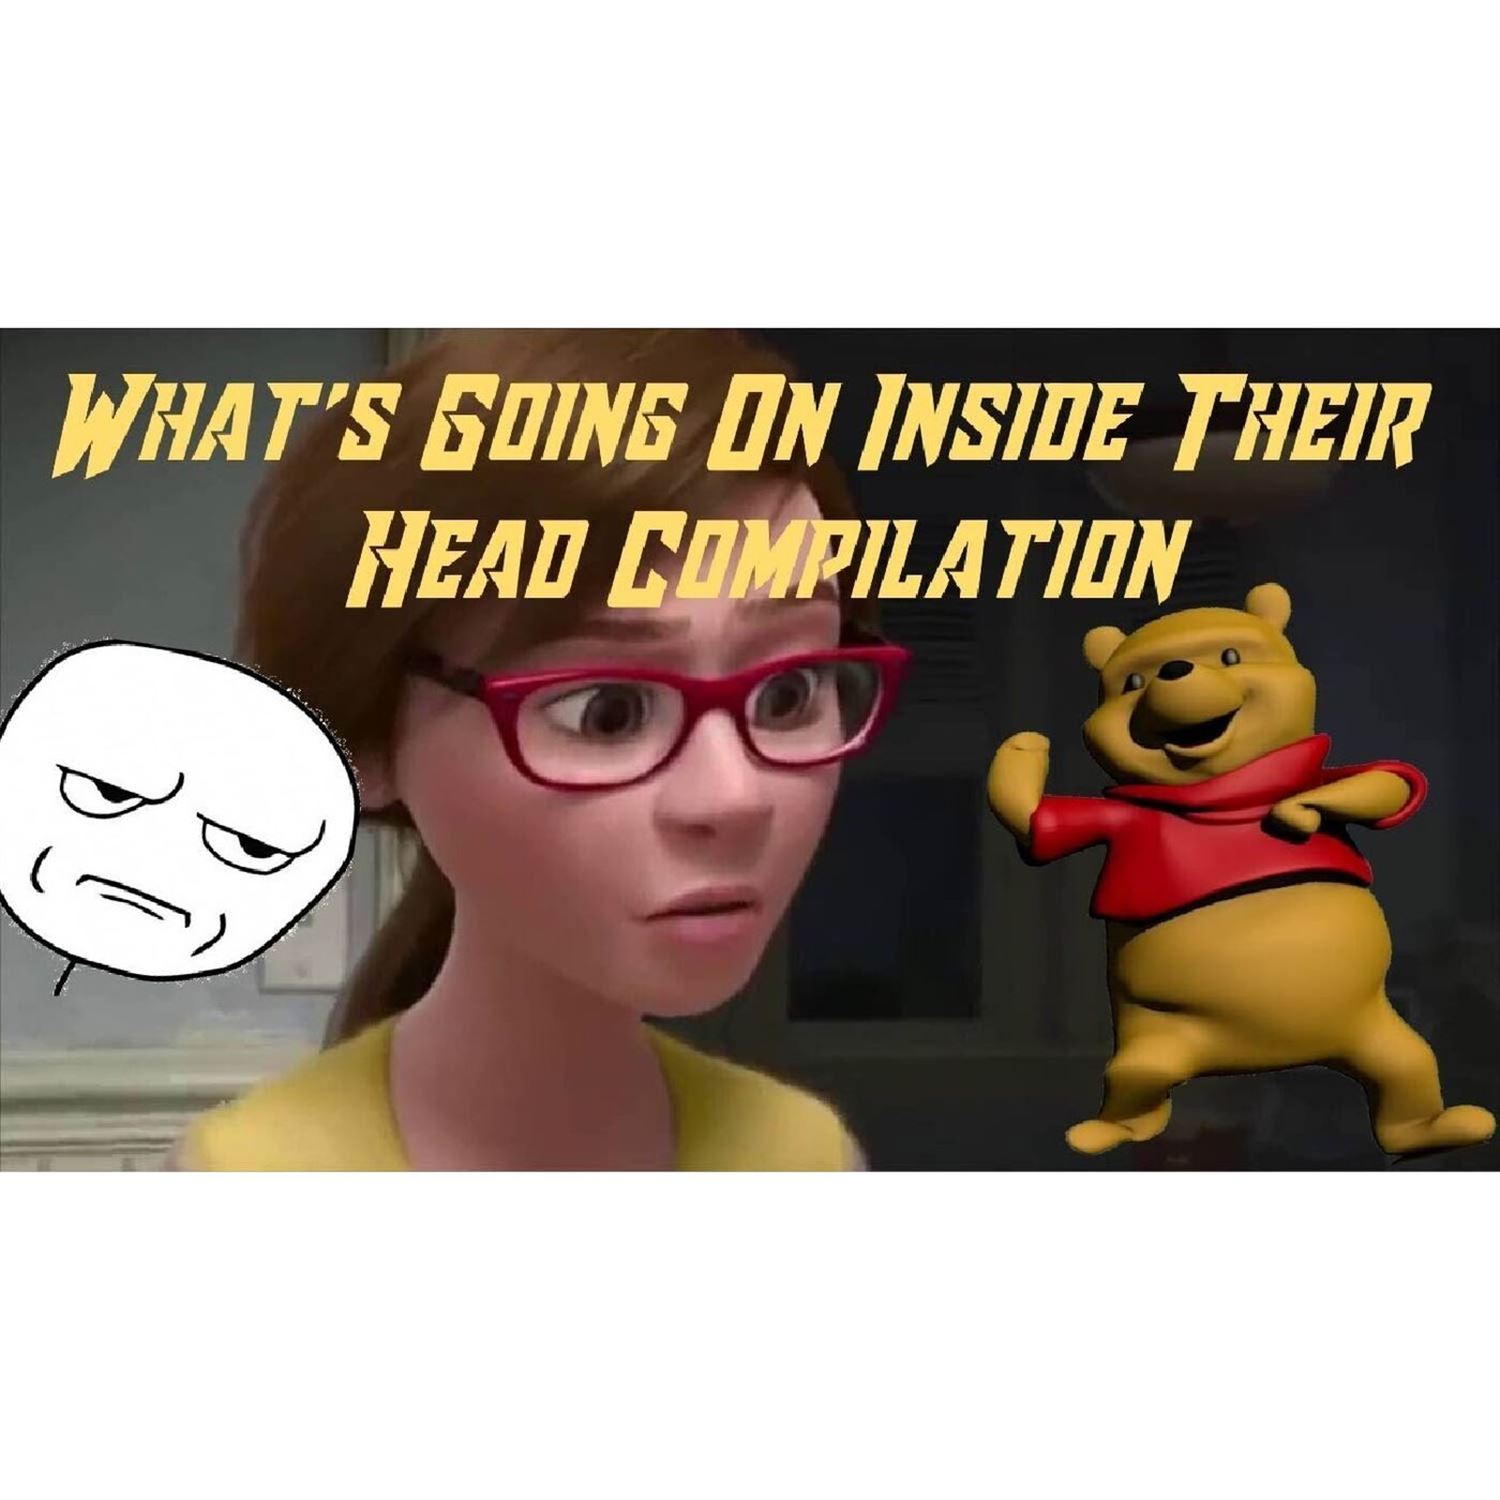 Do you ever look at someone and wonder "what is going on inside their head"?